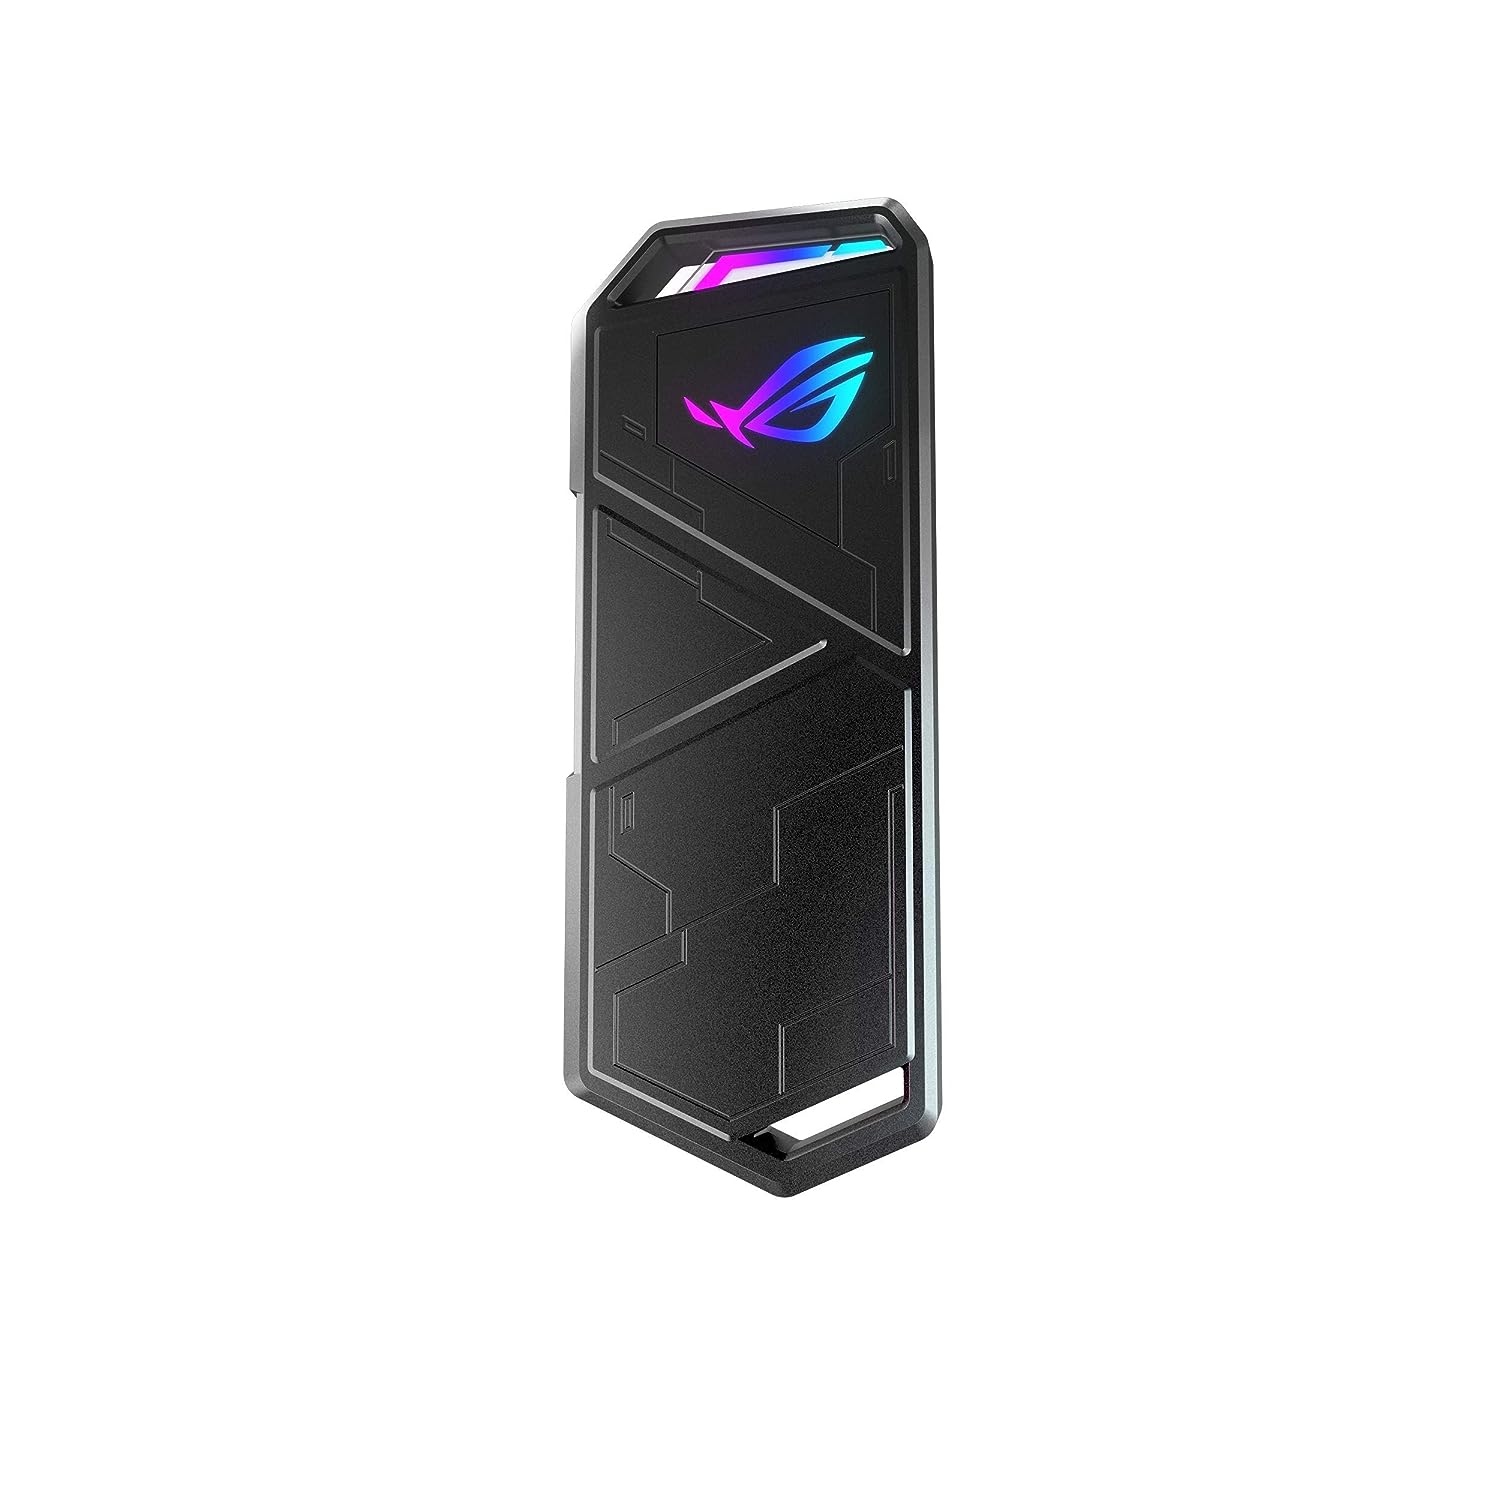 ASUS ROG Strix Arion Aluminum Alloy M.2 NVMe External SSD Holder Portable Enclosure Case, USB 3.2 Gen 2 Type-C (10 Gbps), USB-C to C and USB-C to A Cables